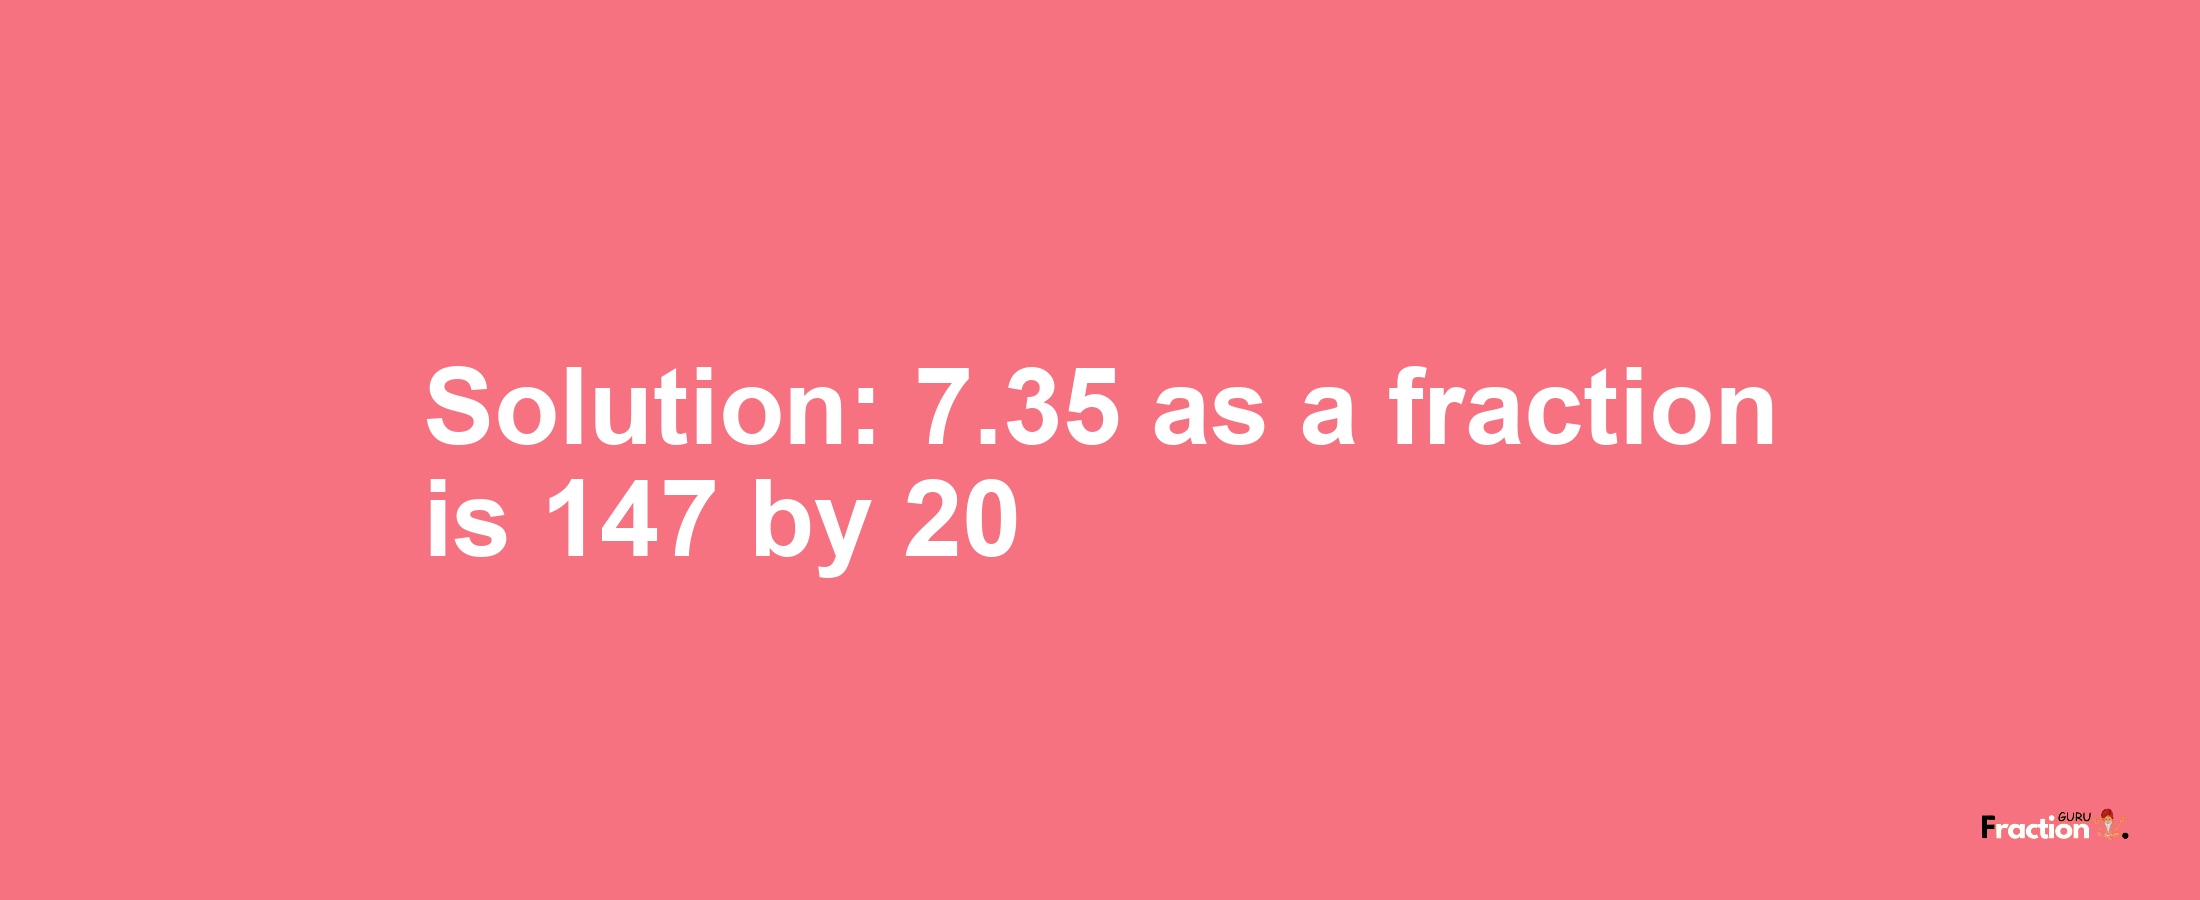 Solution:7.35 as a fraction is 147/20